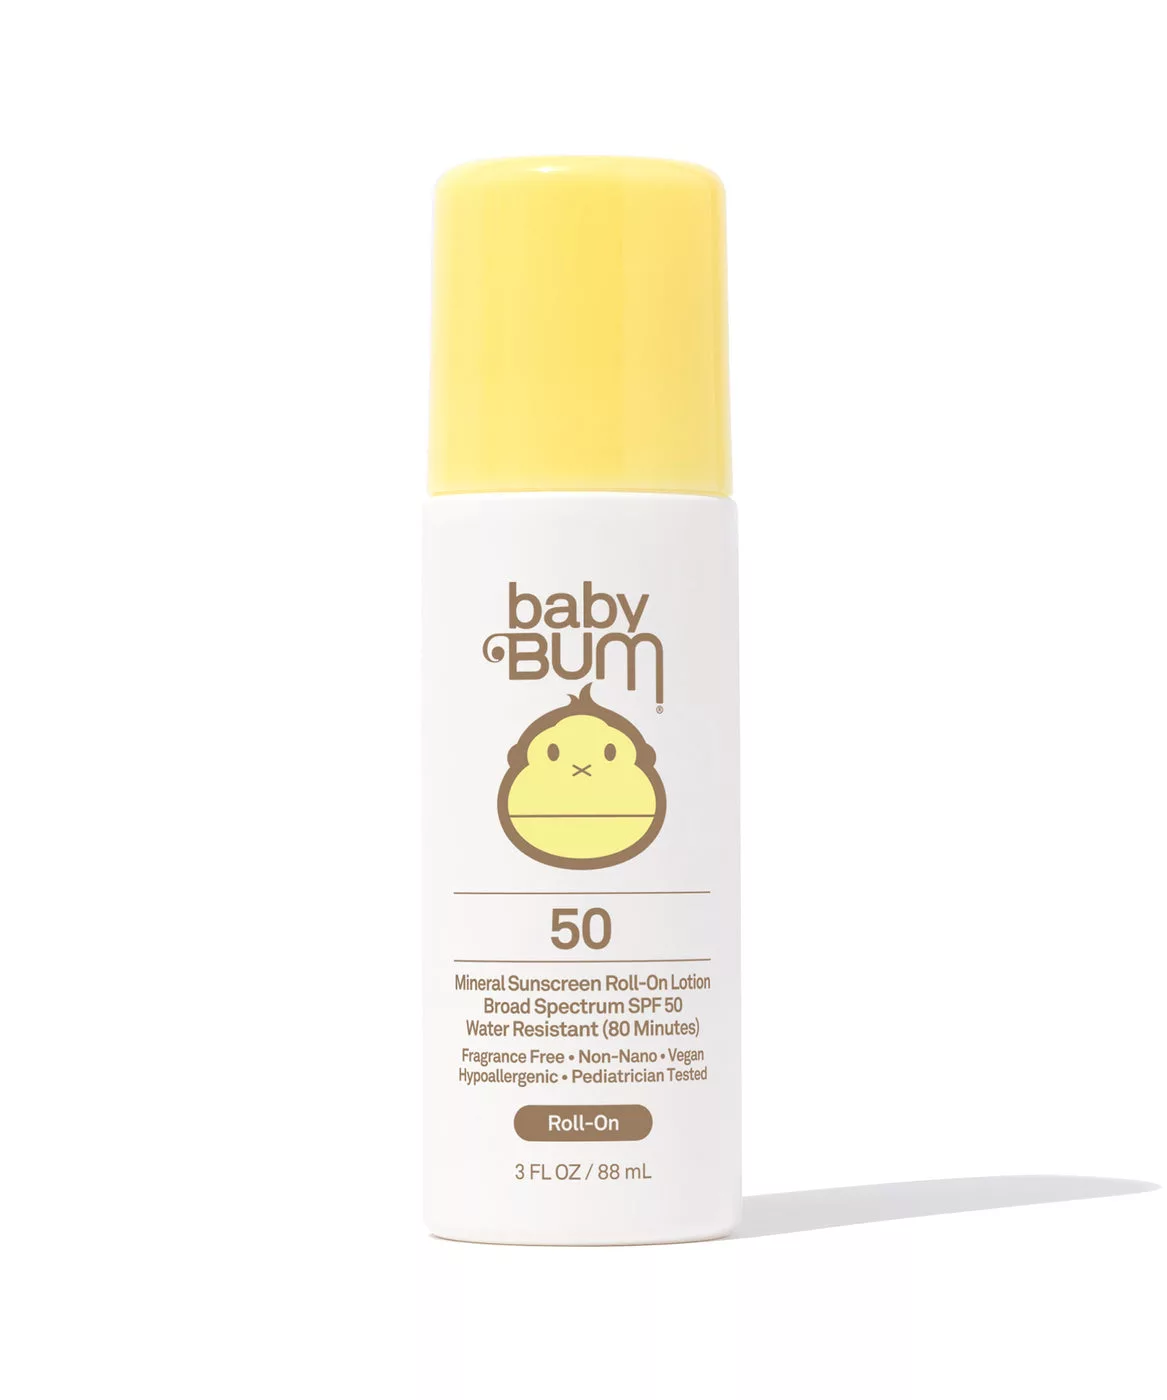 1_SB_USA_BABY_Mineral_SPF50Roll-OnLotion_3oz_Front_2000x2400_PDP_444104_1400x1400